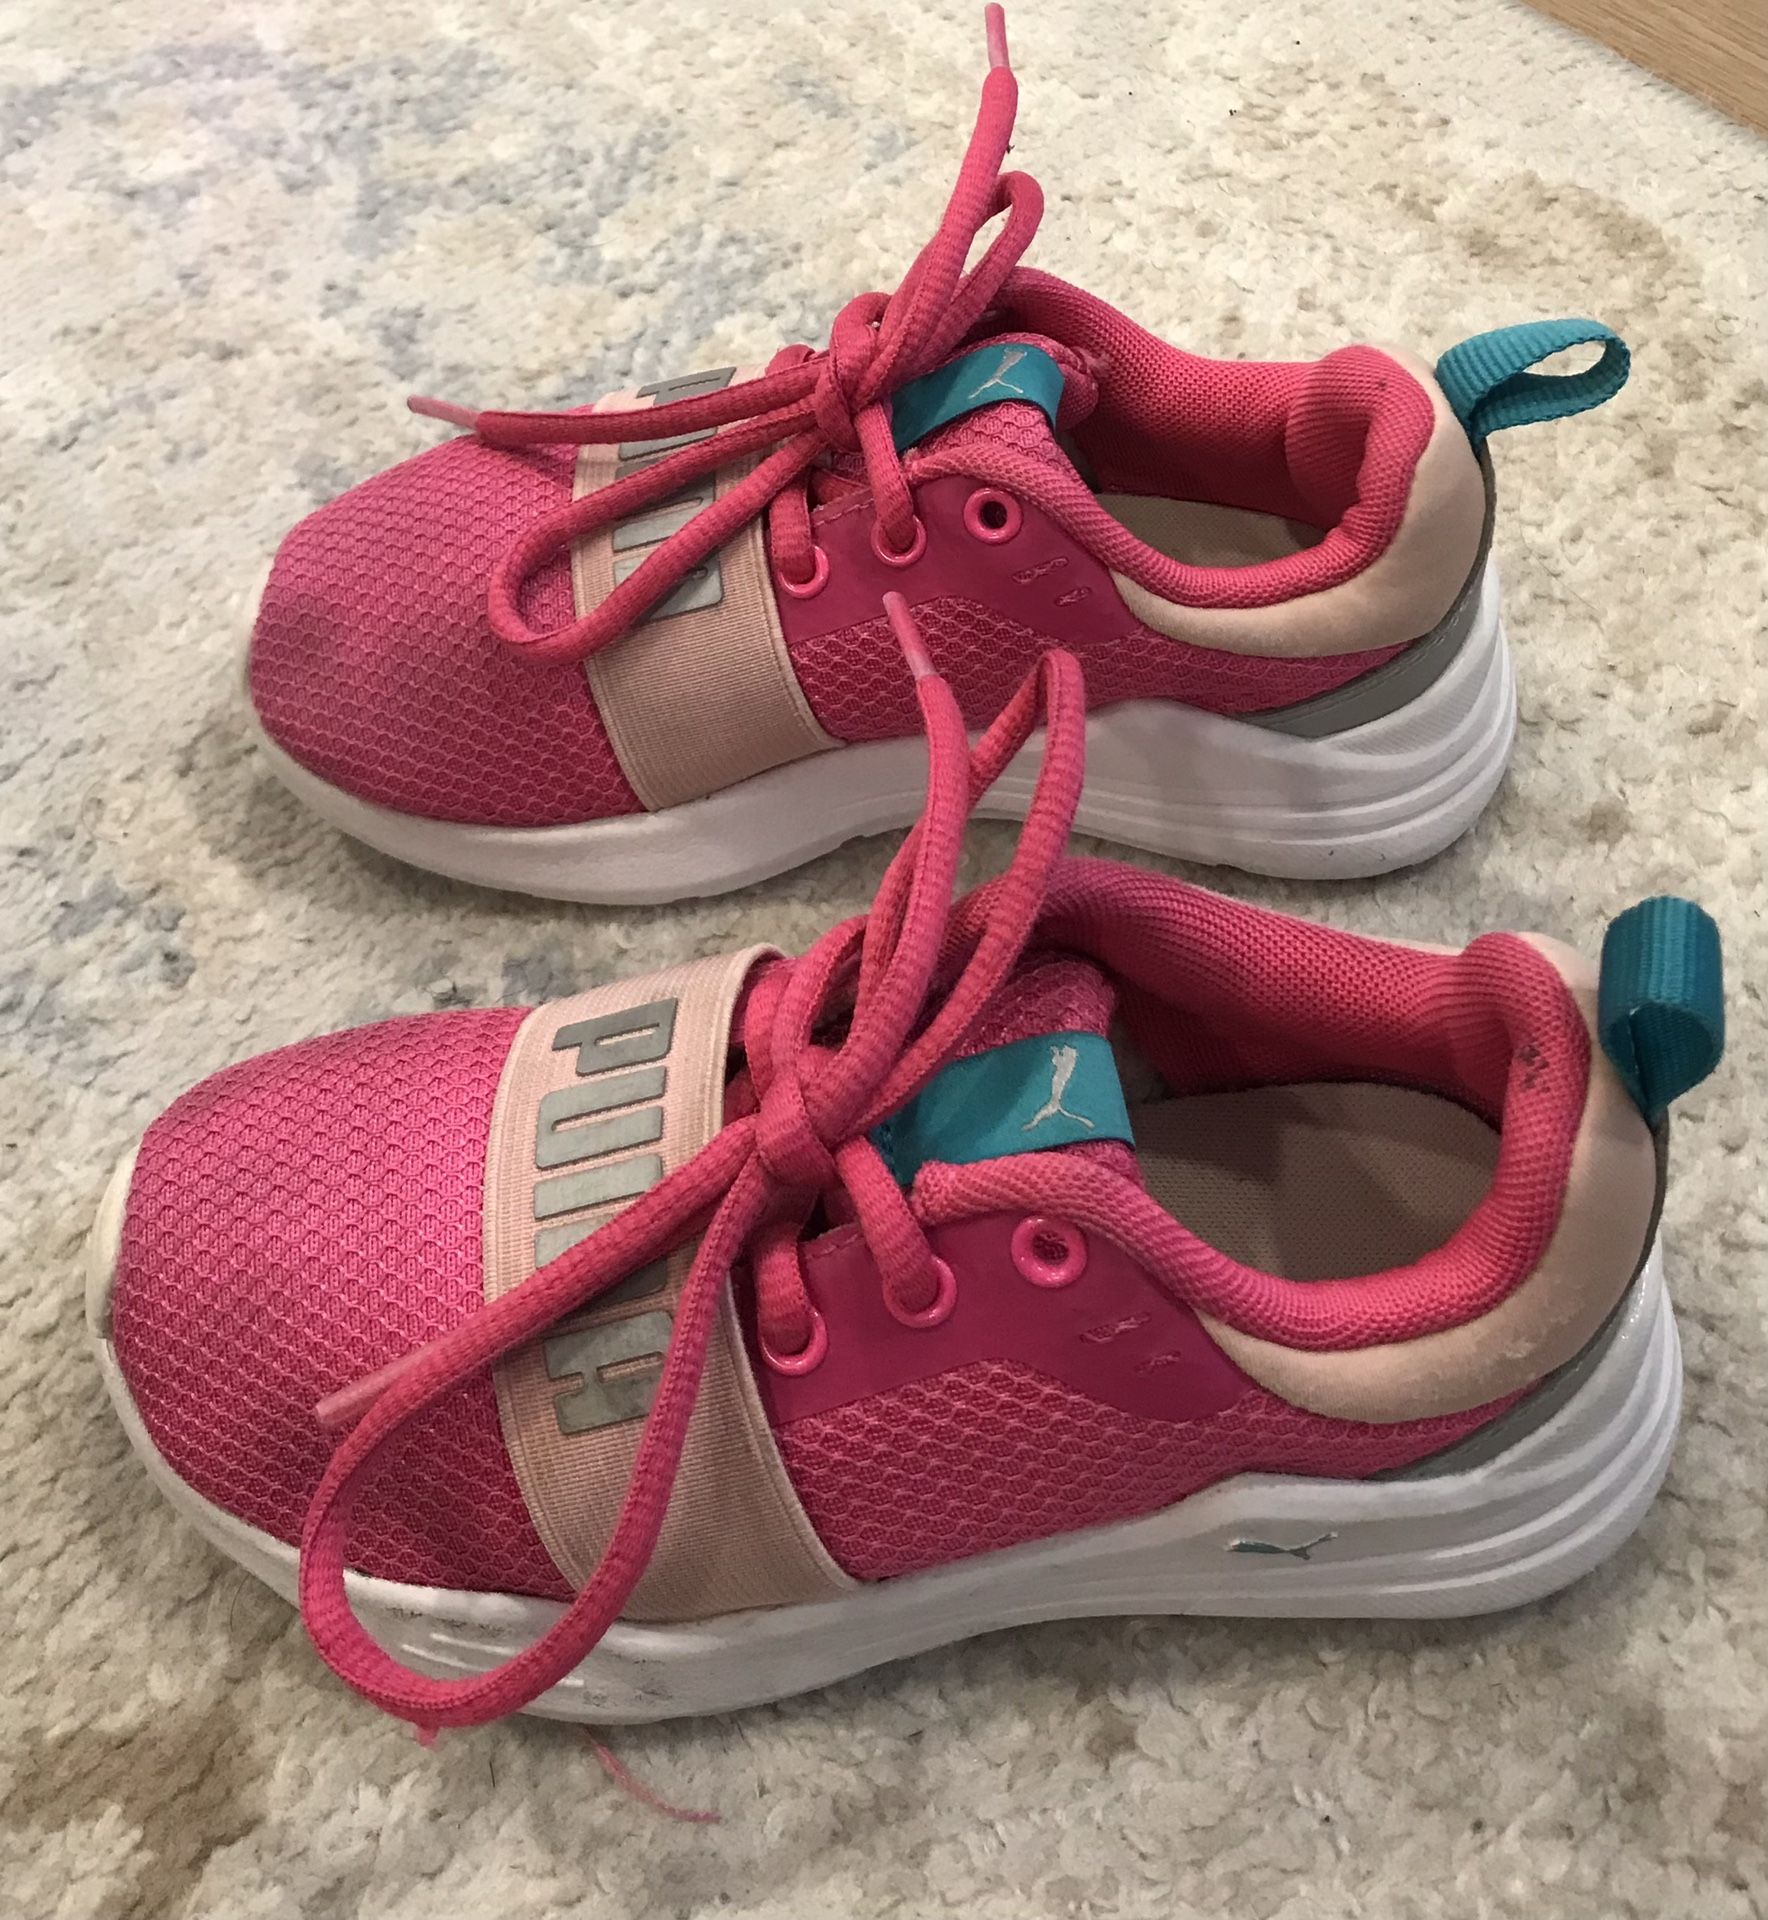 Puma Toddler Shoes Size 10.5